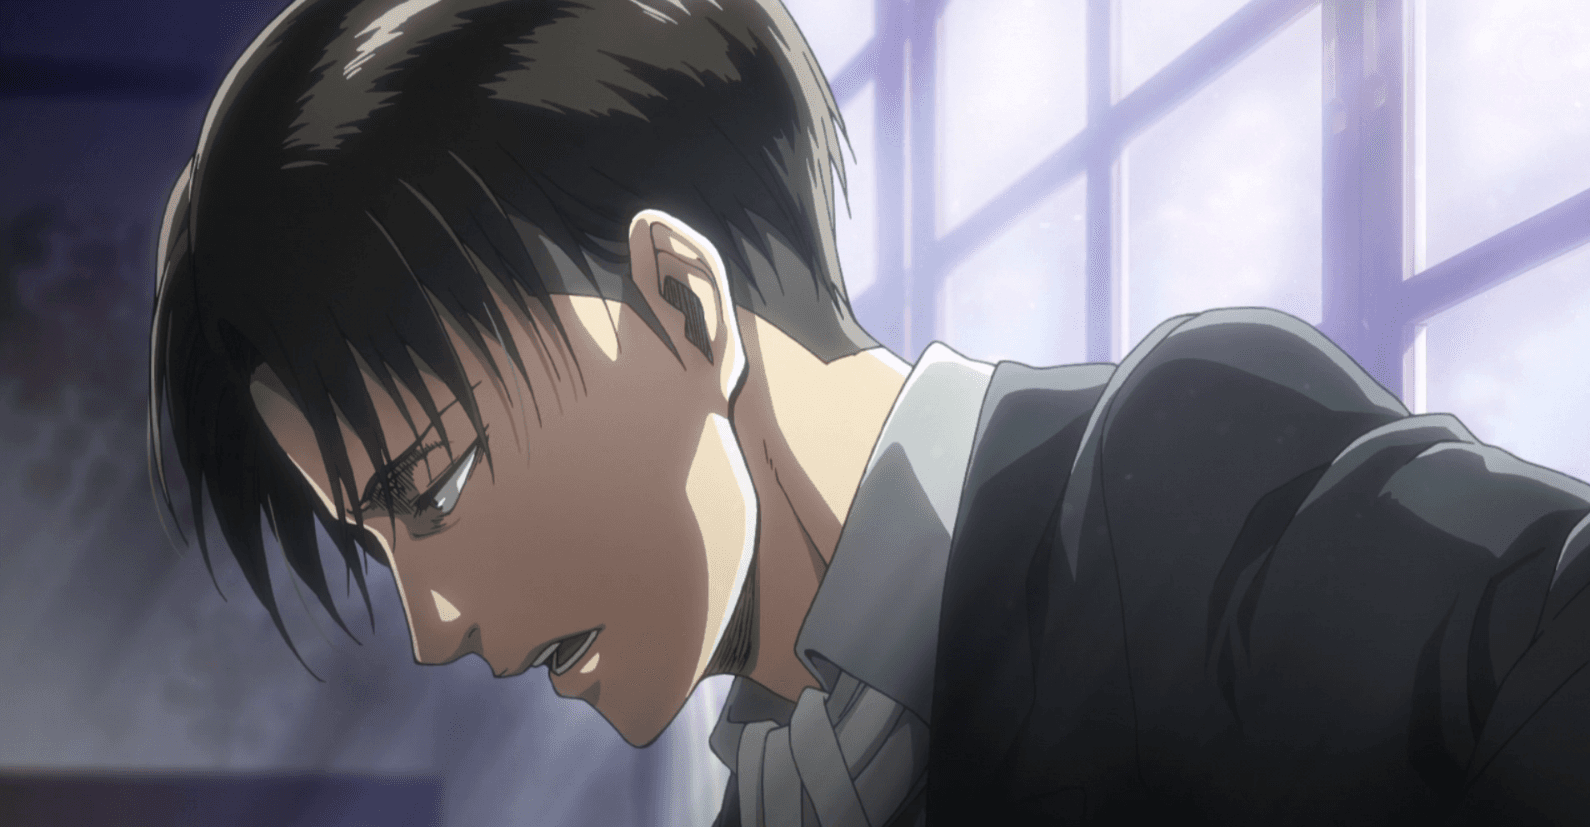 Which Attack On Titan Character Are You, Based On Your Zodiac Sign?